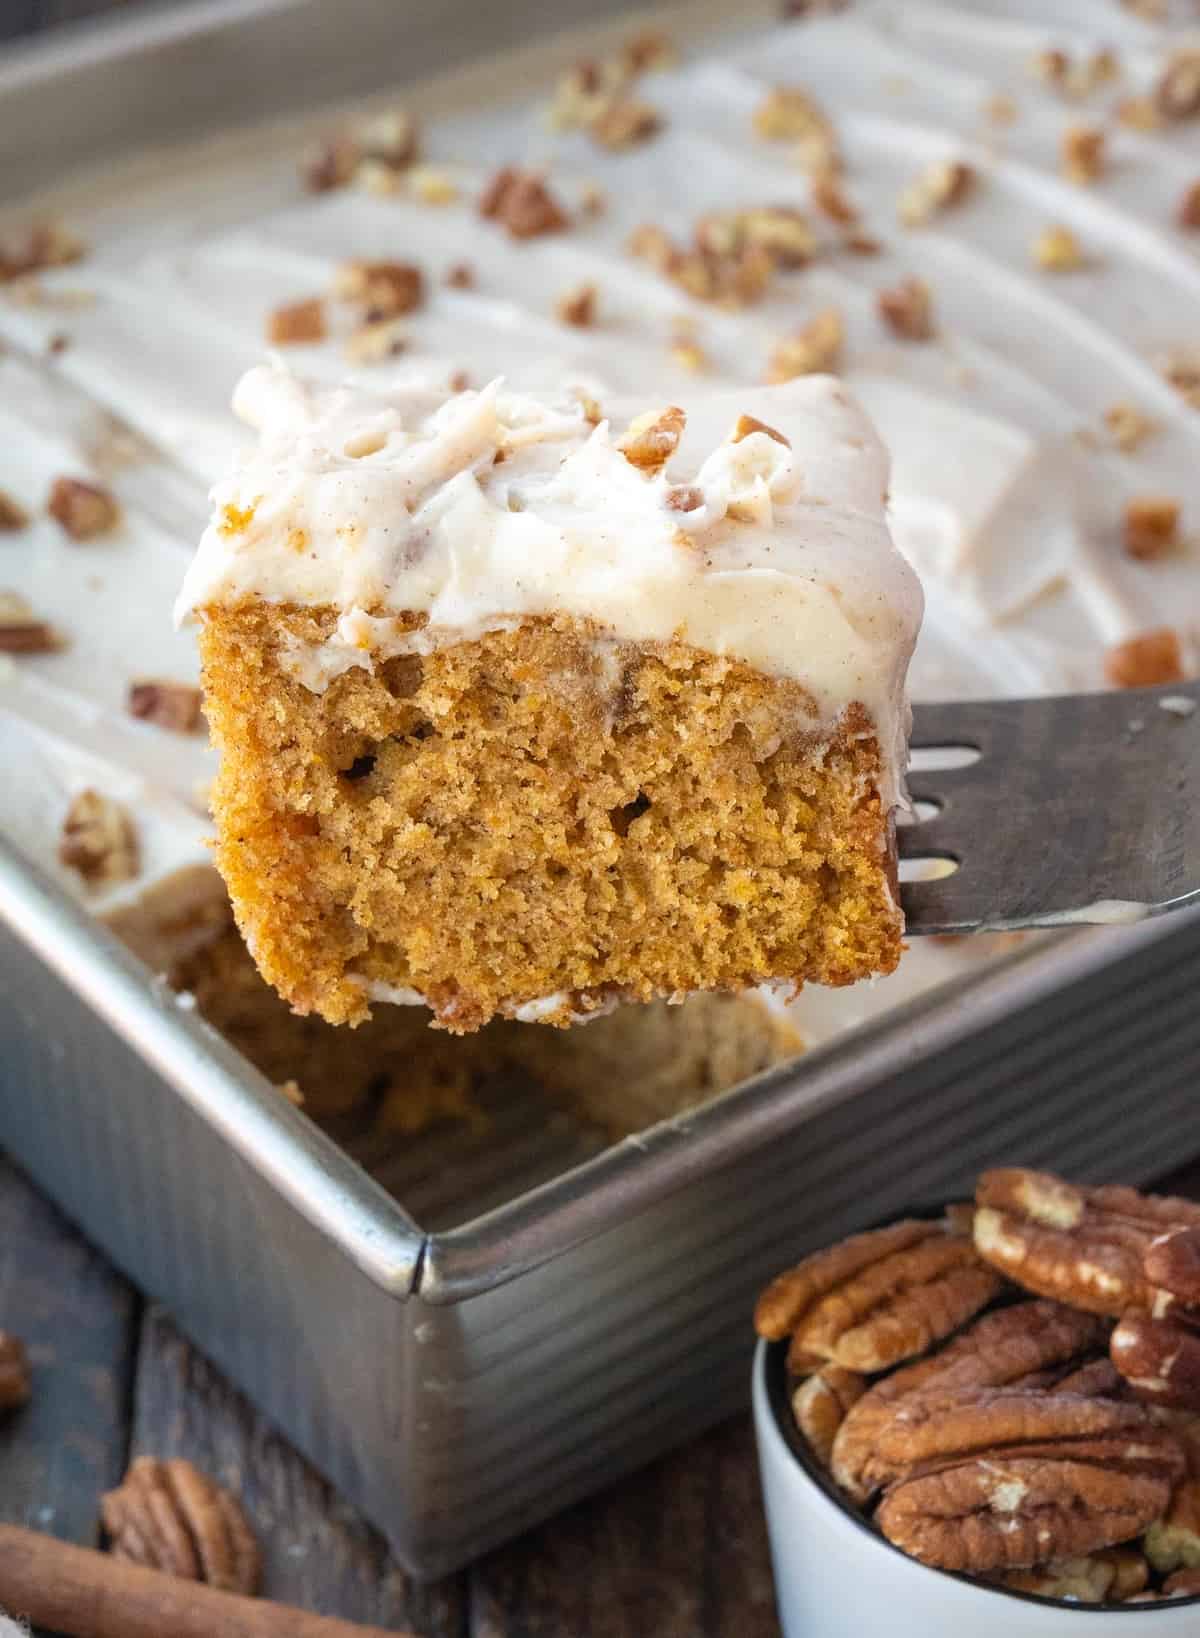 A slice of sweet potato cake being picked up with a spatula.